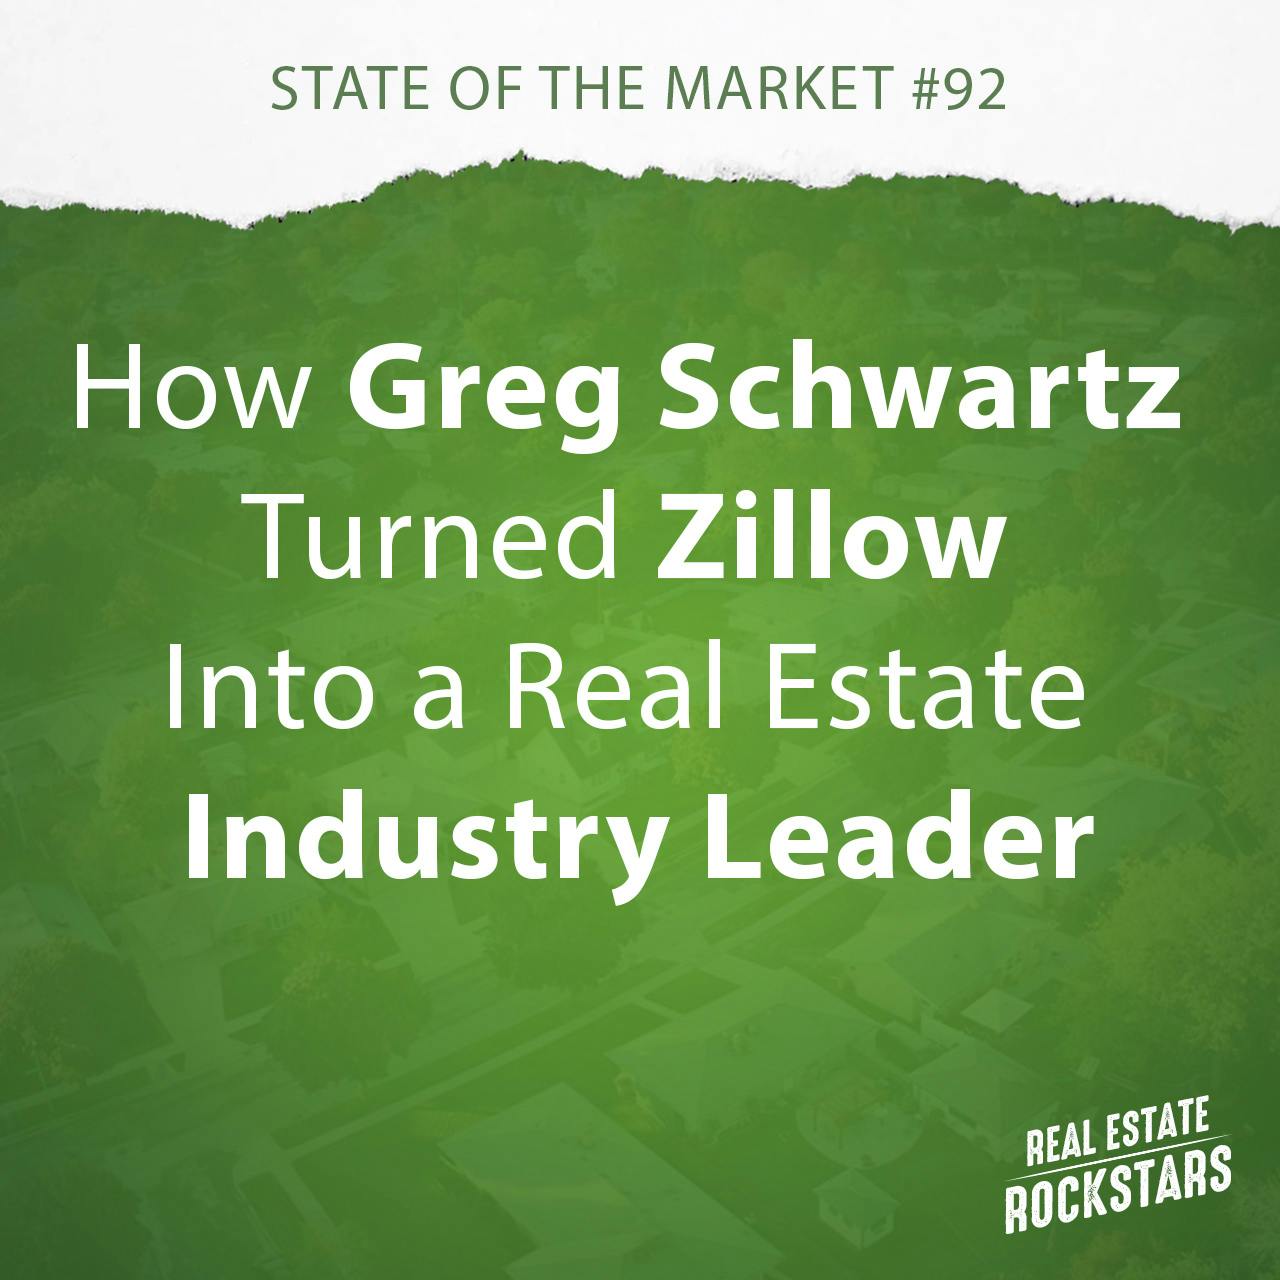 SOTM 92: How Greg Schwartz Turned Zillow Into a Real Estate Industry Leader